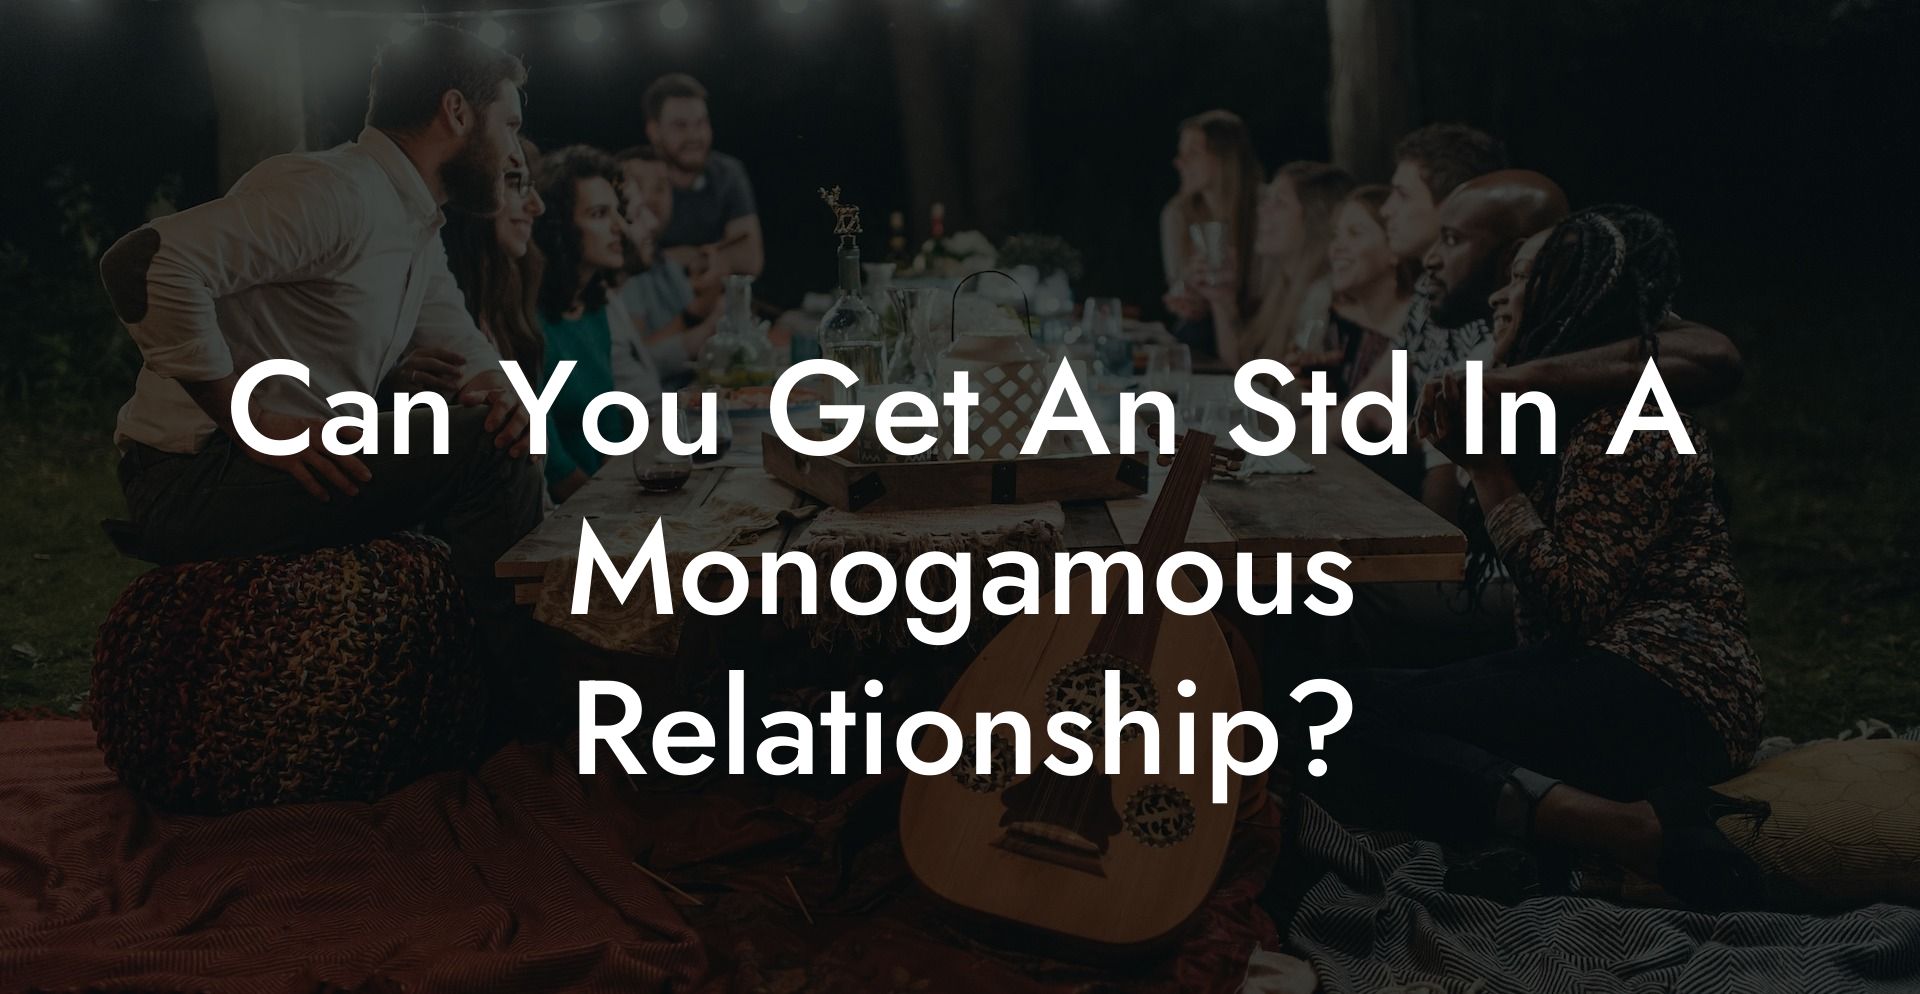 Can You Get An Std In A Monogamous Relationship?